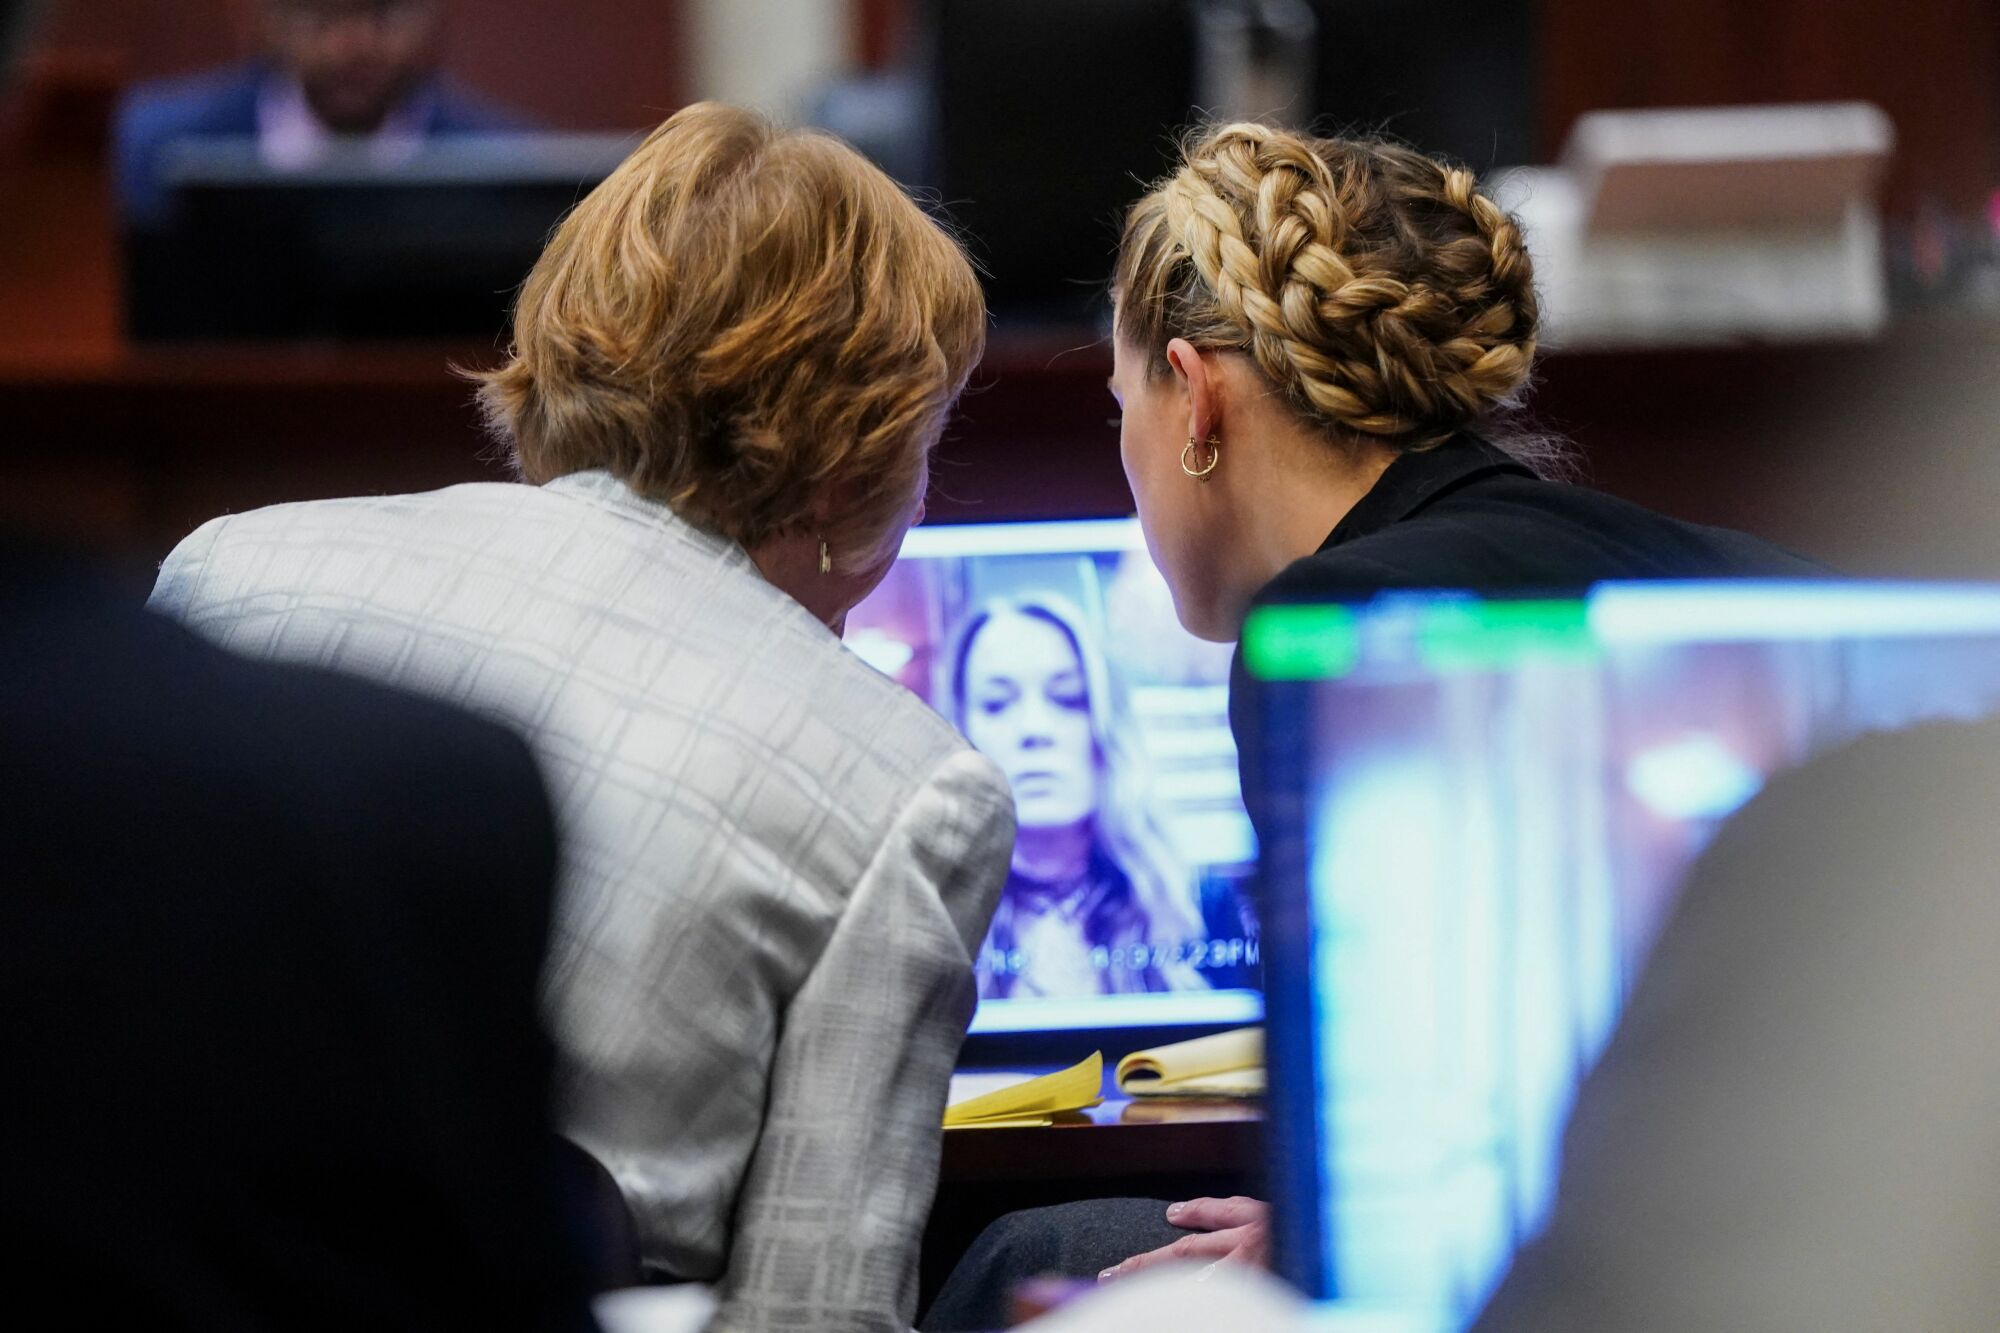 Heard and her attorney photographed at their desk in court from behind, watching a video of James on the computer screen in front of them.